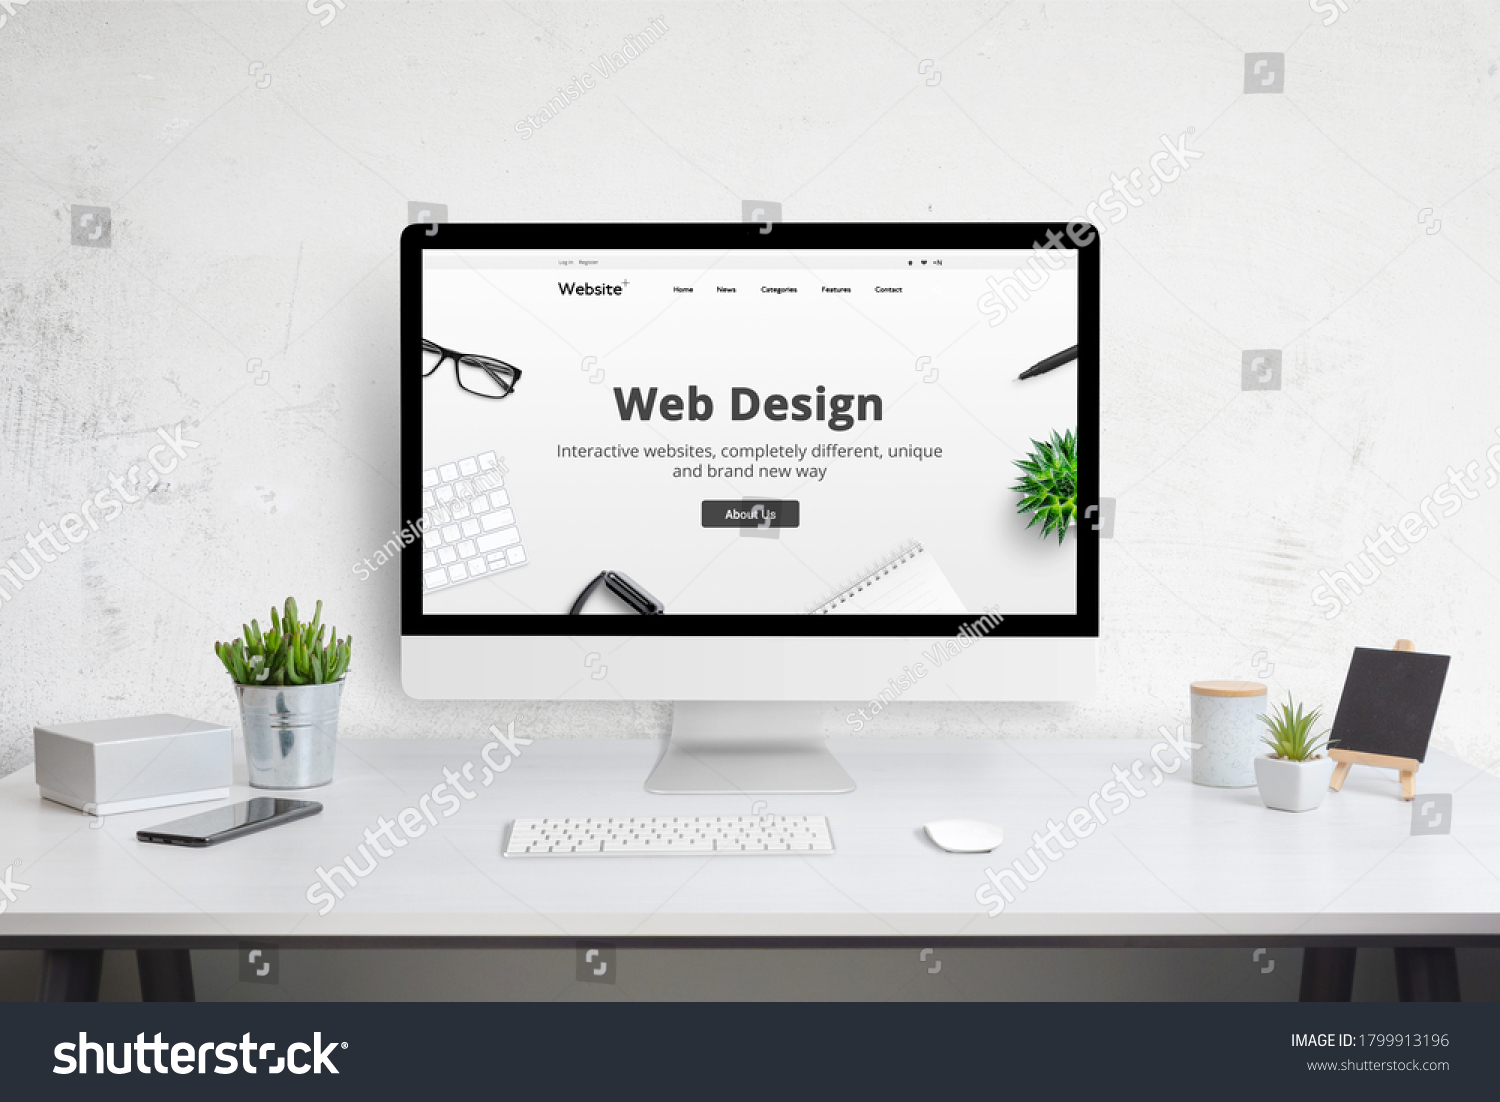 Web design company web site concept on computer display. Modern flat design website. Office desk with plants, phone, keyboard and mouse. #1799913196